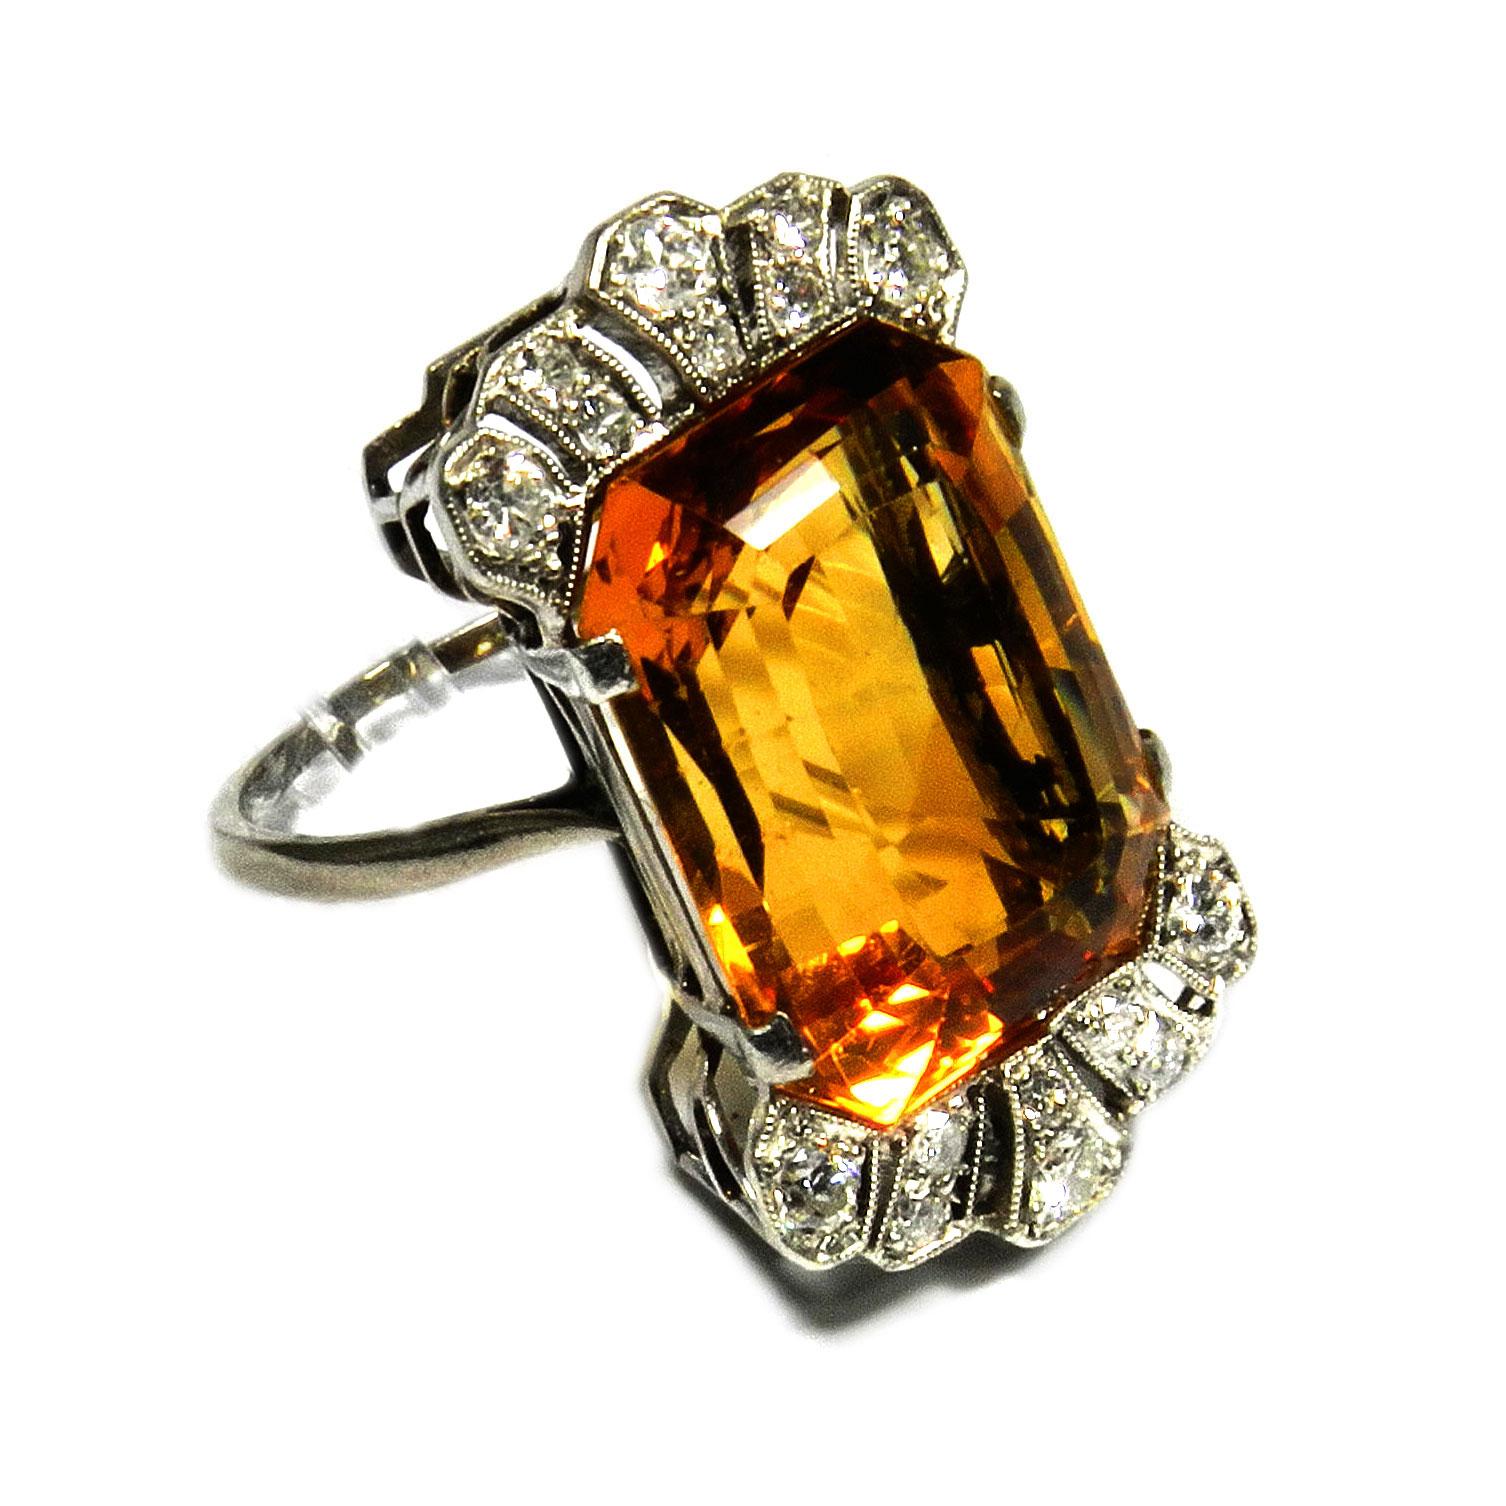 Art Deco 18.7 Carat Citrine Diamond Cocktail Ring in 18K White Gold, circa 1930

Elegant cocktail ring with a lattice-shaped openwork ring head, set with a magnificent cognac-colored  18.7 carat citrine, crowned by diamonds totaling 0.5 carat

